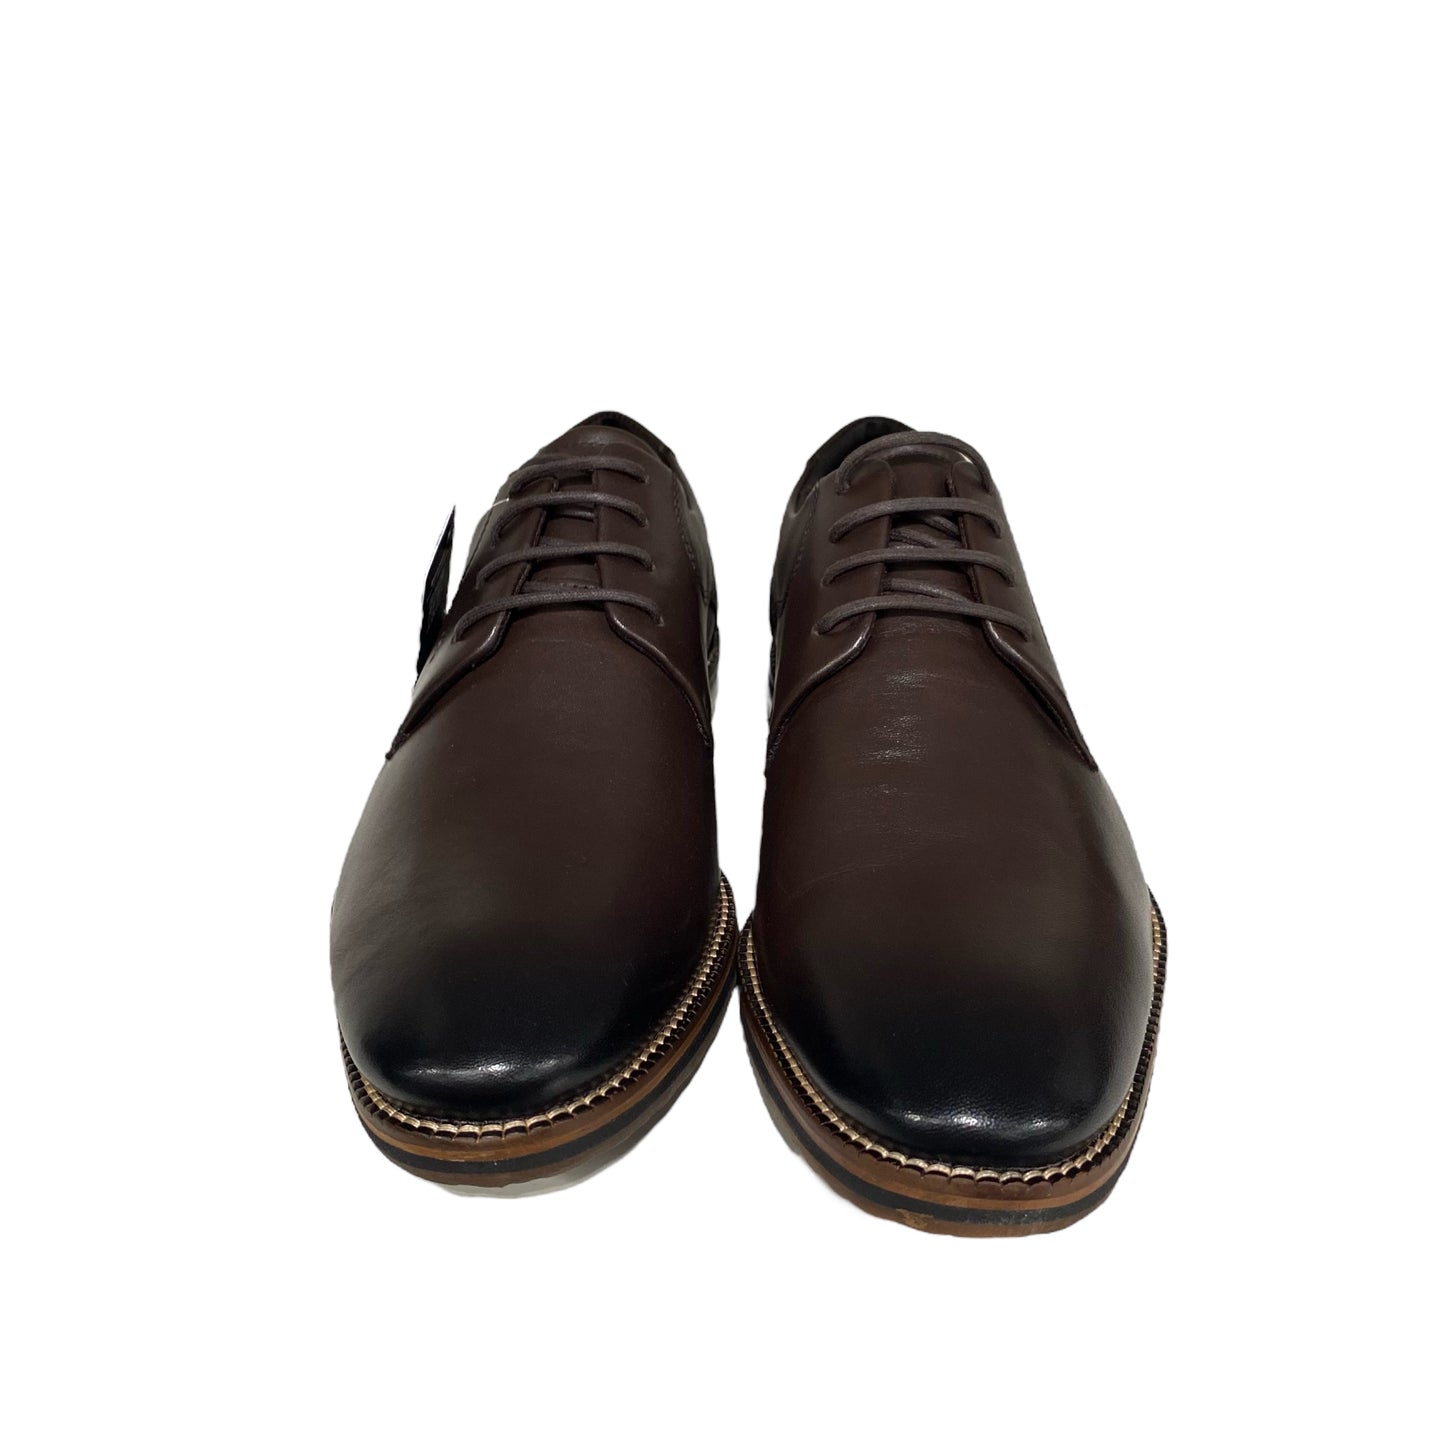 Ferracini - Fergus Shoes - Brown or Black Leather